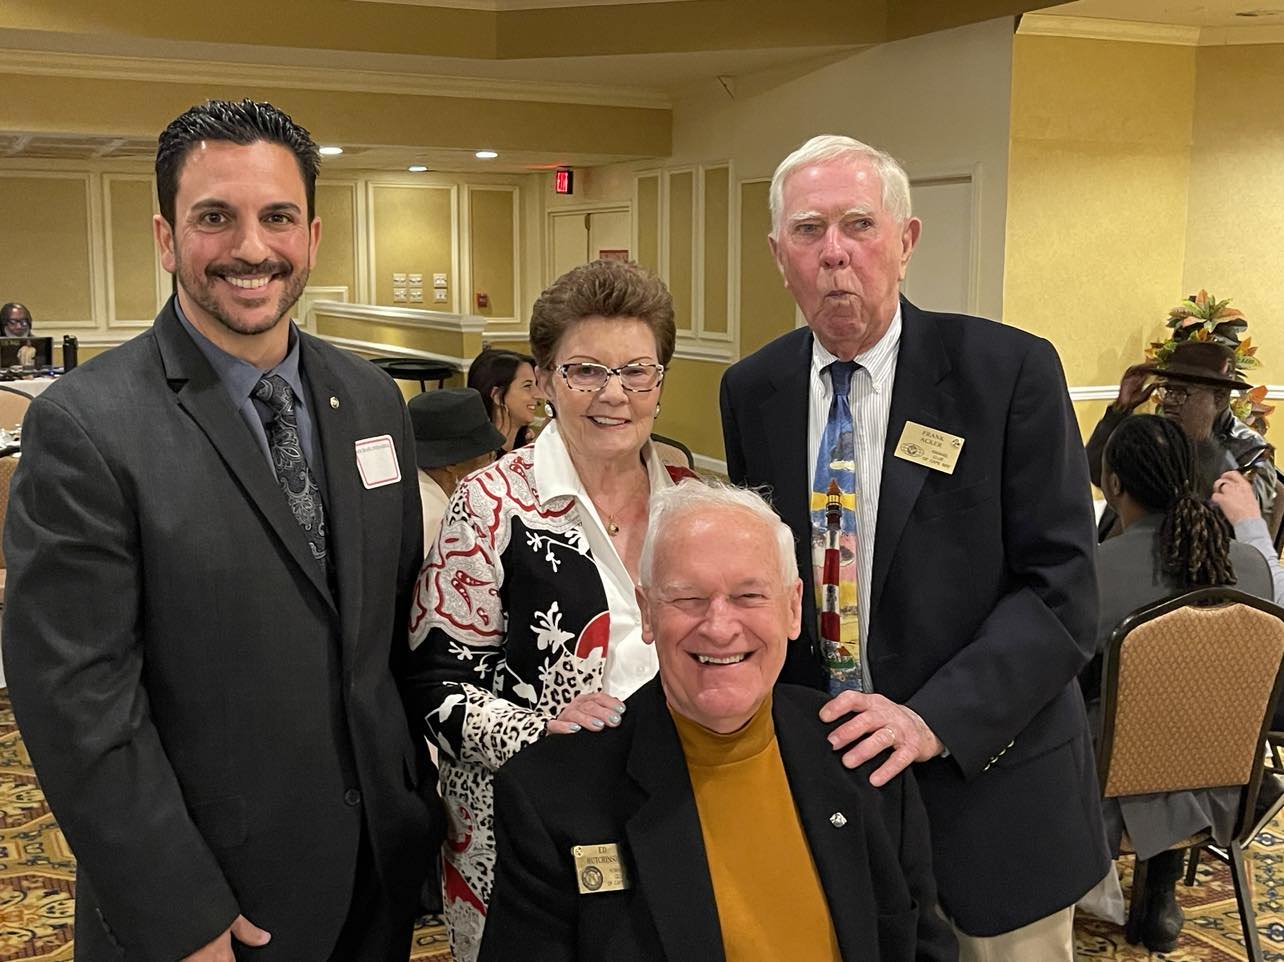 Mike Pasquerello, (Left) Jennie McCaney (Top Center) Frank Acker, (Right) and Ed Hutchinson (Seated Center) attend Charter Night for the Atlantic City Kiwanis Club. Photo Credit: Mark Tyler